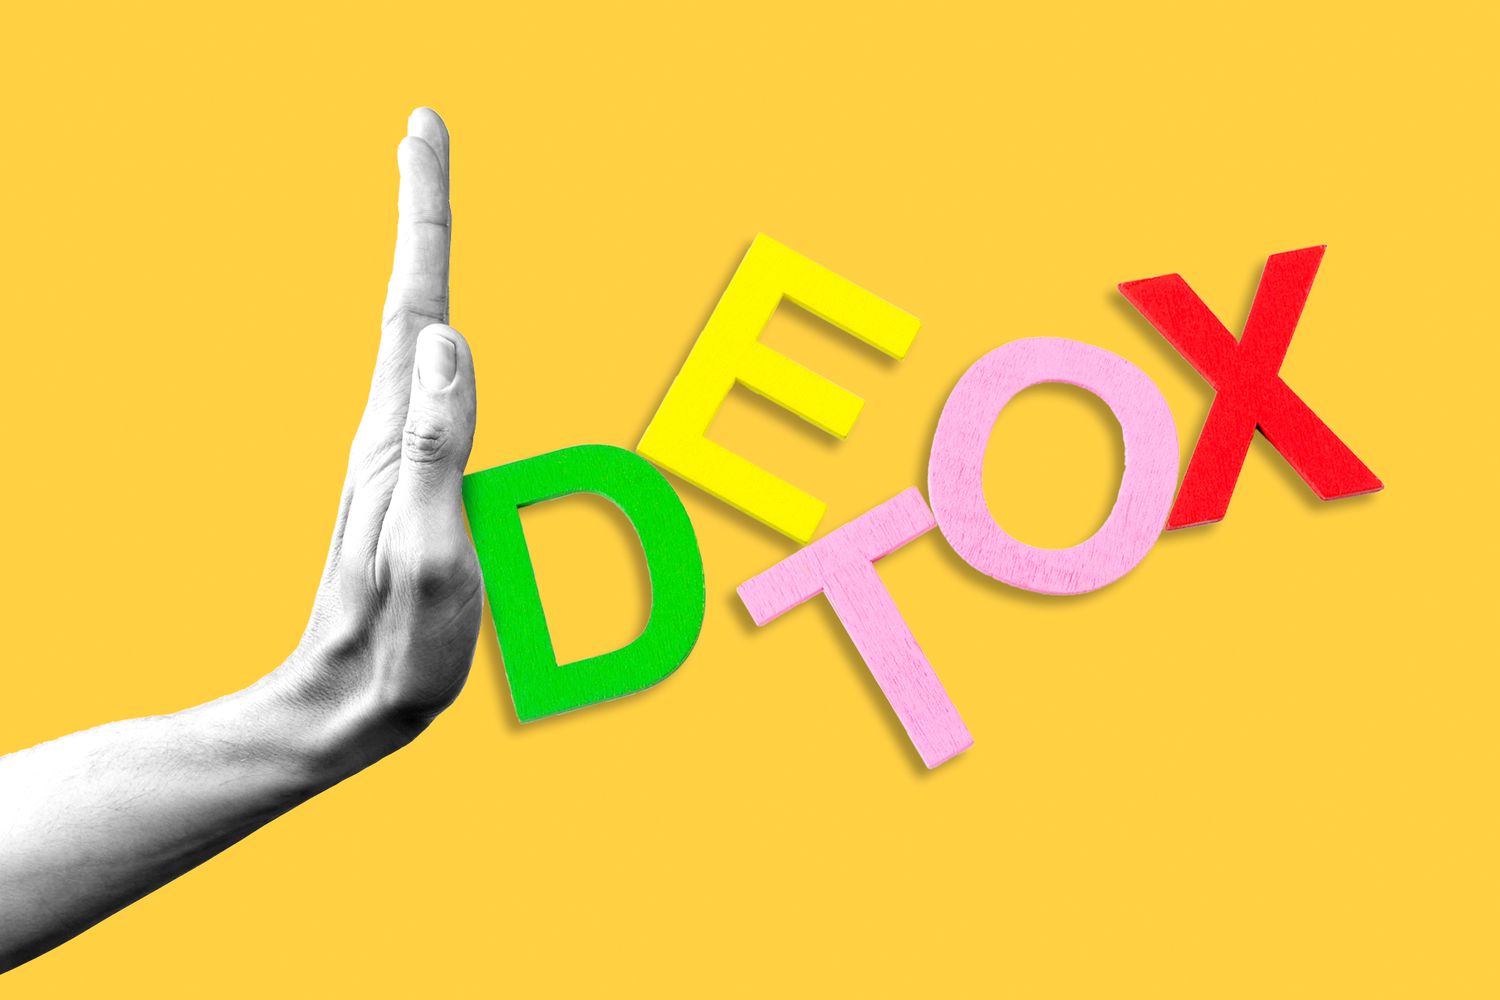 A hand pushing letter blocks that spell out "detox"